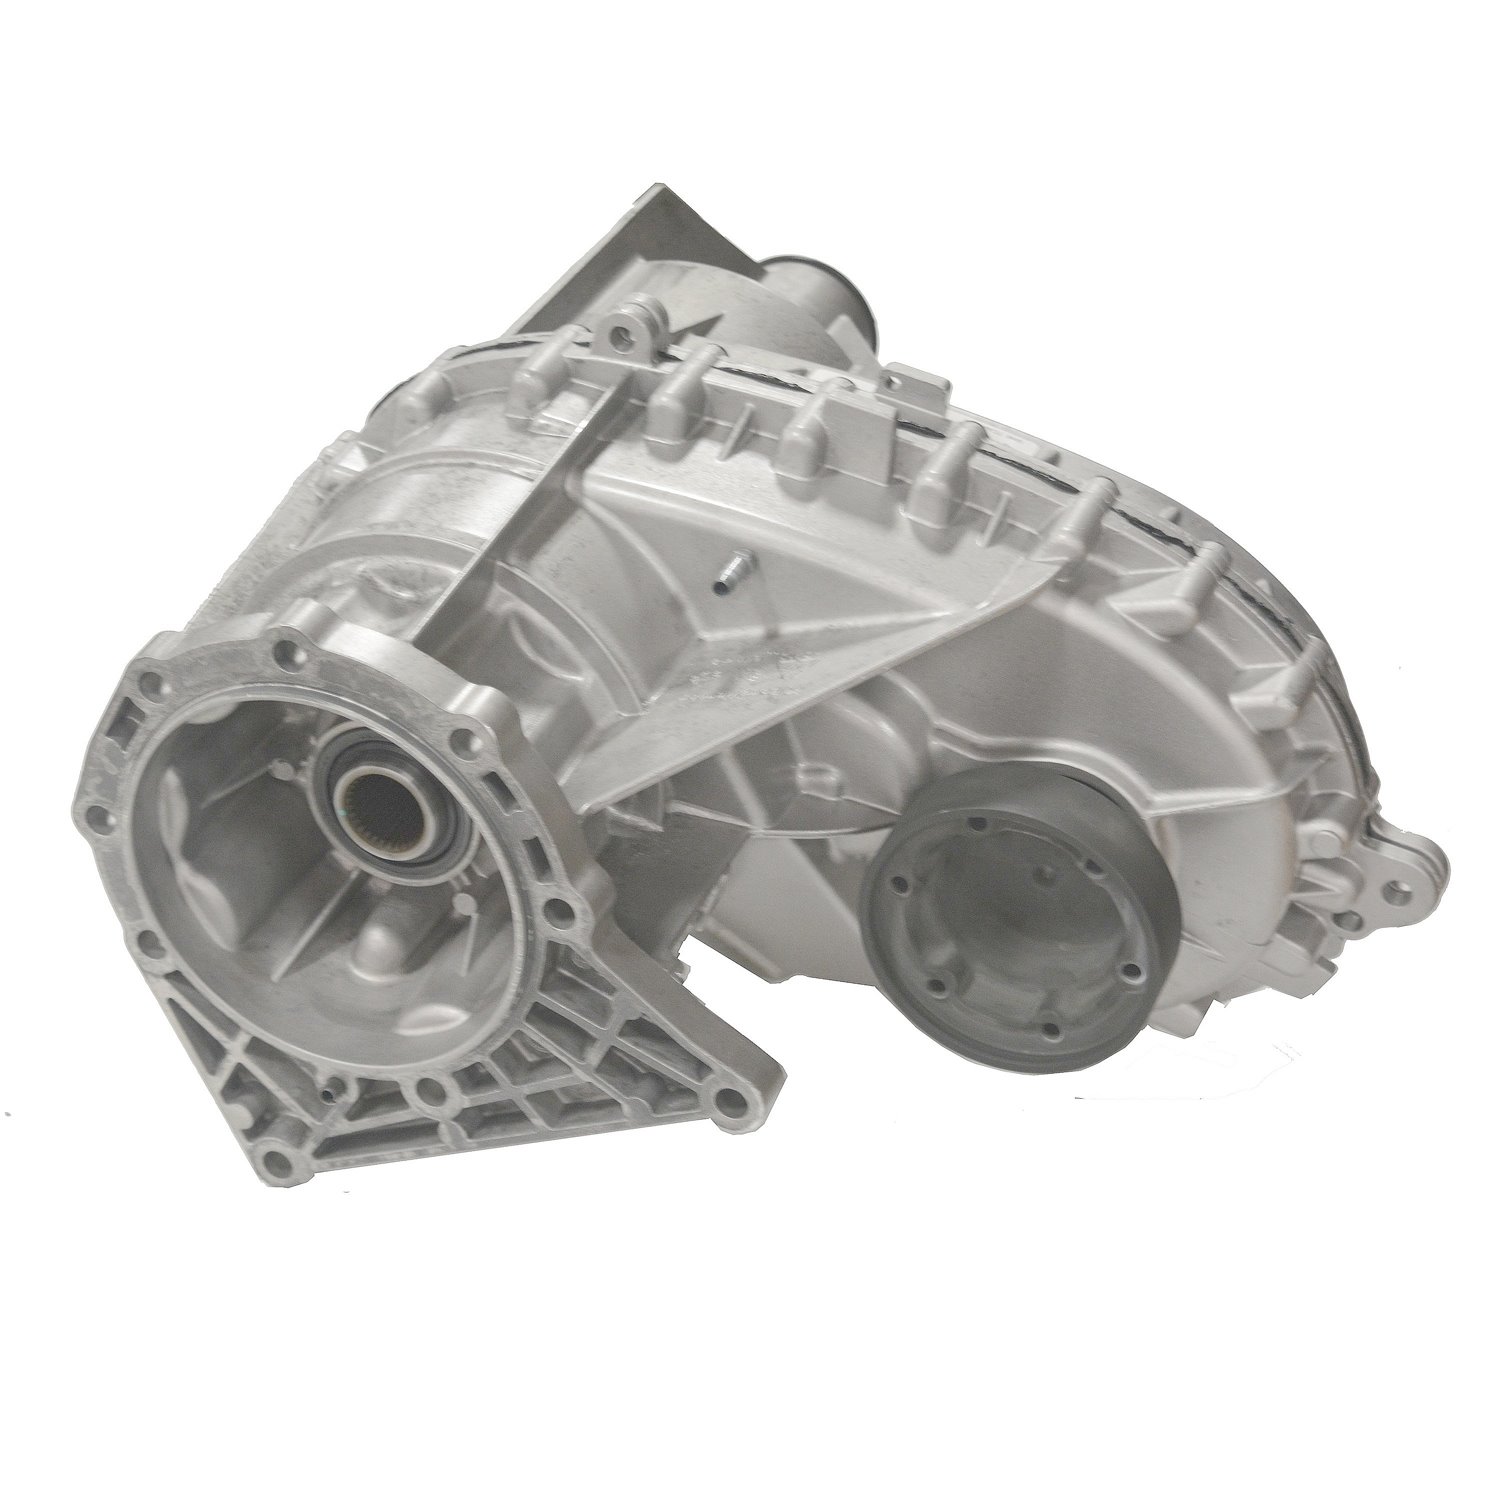 Remanufactured BW4417 Transfer Case for Ford 07-14 Expedition/Navigator